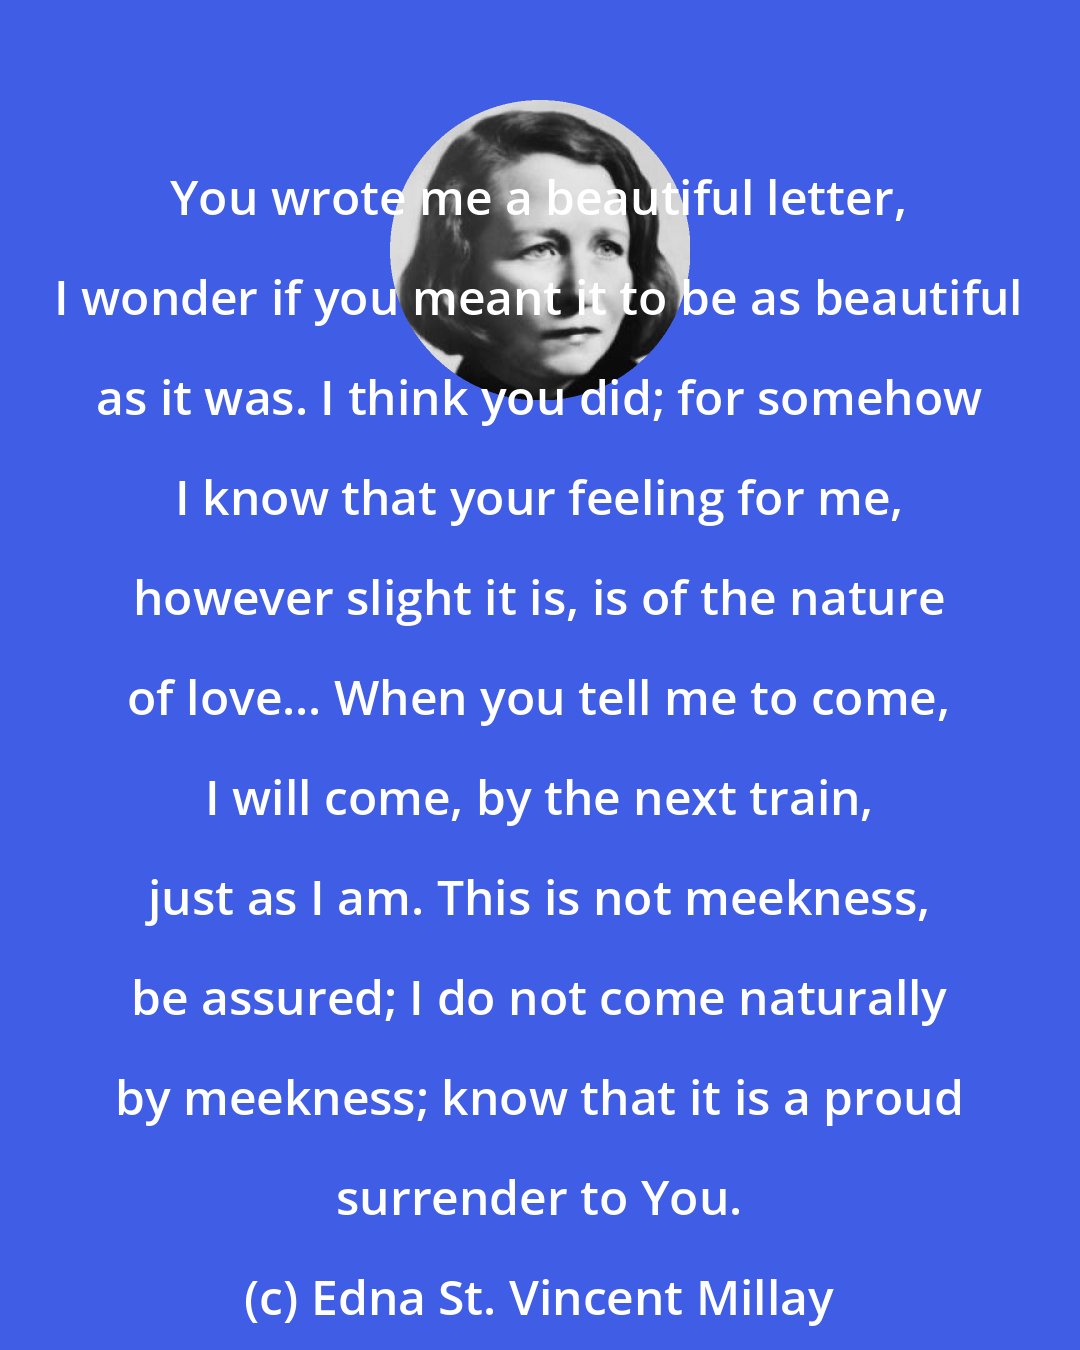 Edna St. Vincent Millay: You wrote me a beautiful letter, I wonder if you meant it to be as beautiful as it was. I think you did; for somehow I know that your feeling for me, however slight it is, is of the nature of love... When you tell me to come, I will come, by the next train, just as I am. This is not meekness, be assured; I do not come naturally by meekness; know that it is a proud surrender to You.